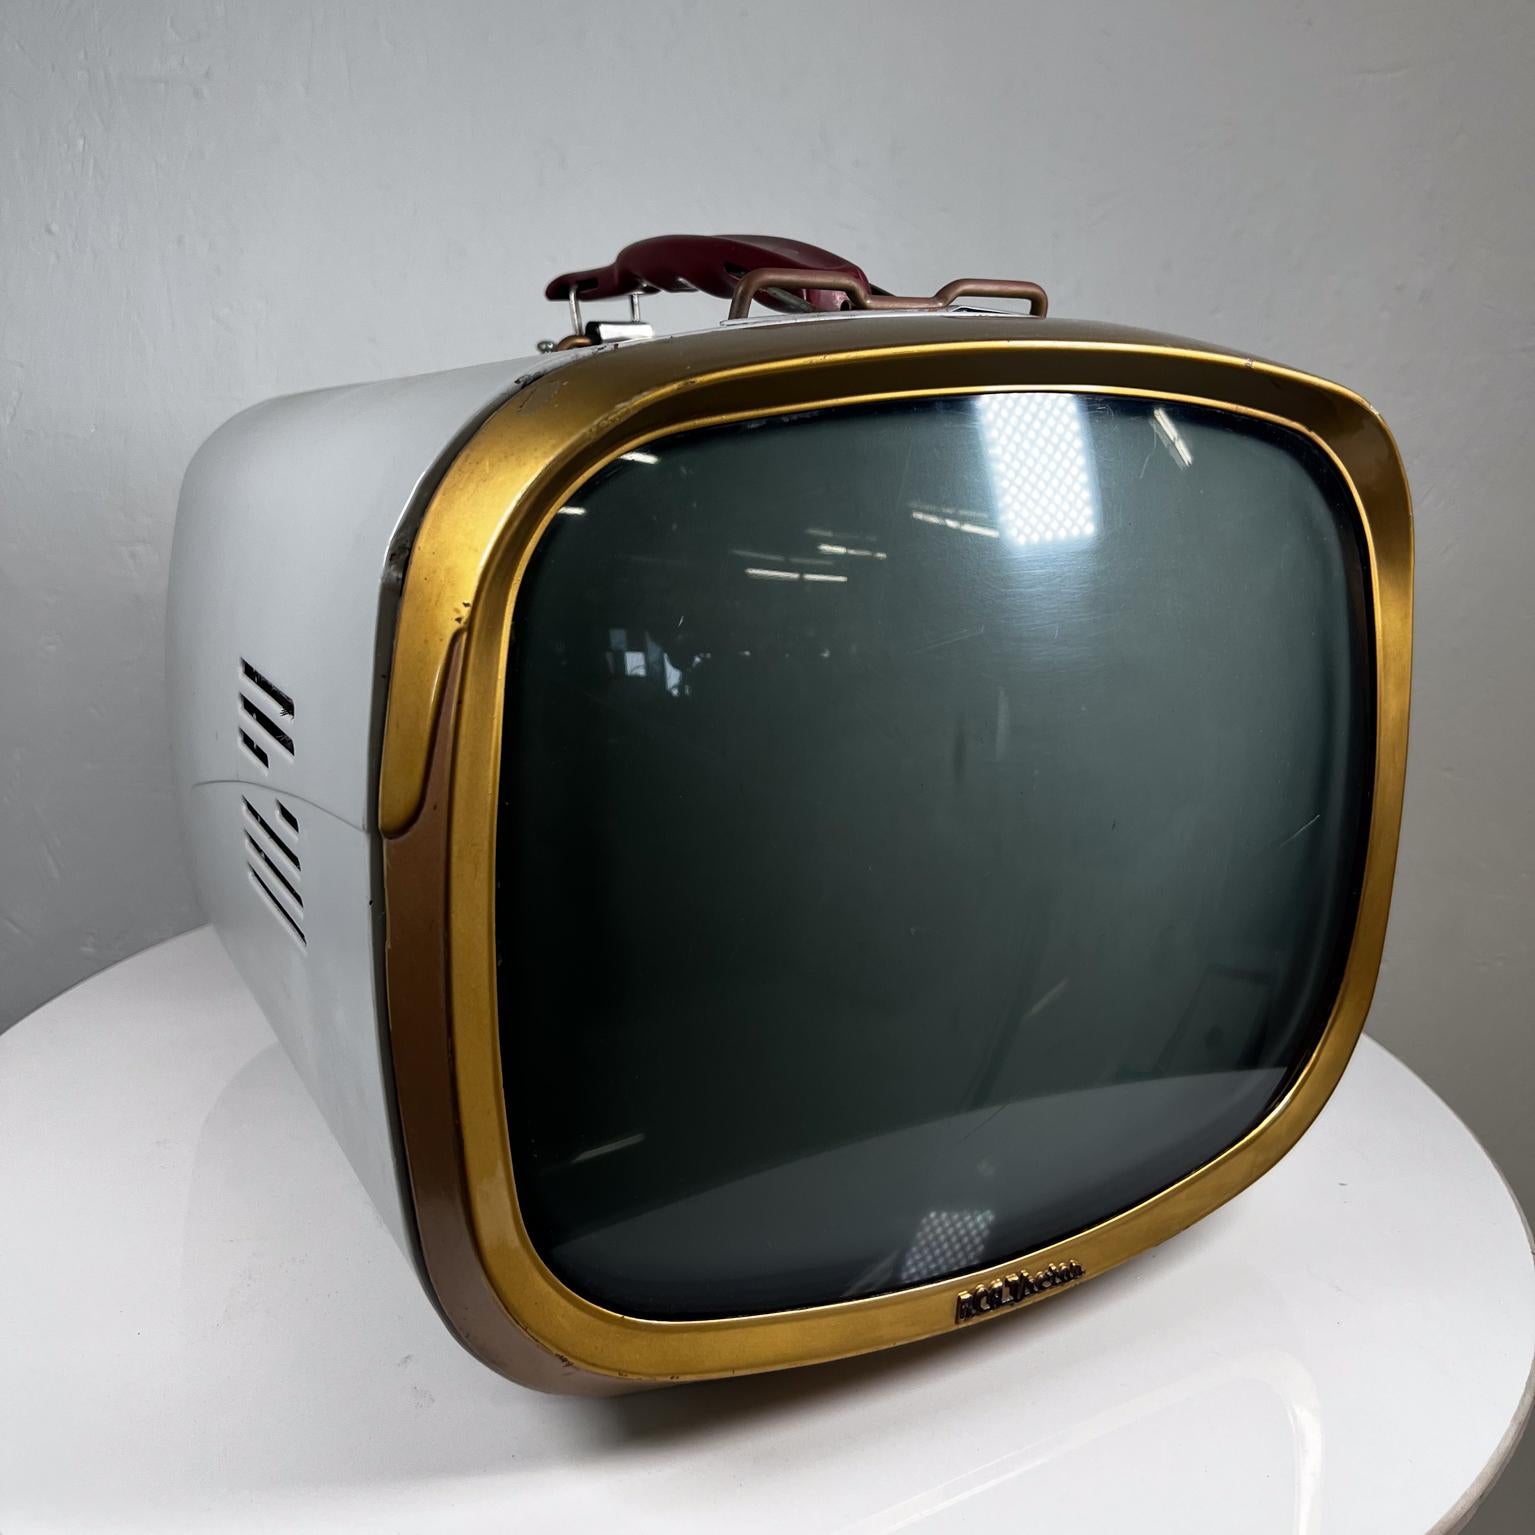 1956 Streamlined Style Midcentury Modern Original Deluxe RCA Victor Television
Portable Tube TV with handle at the top and an Antenna. George Jetson era!
14.25 d x 13.38 w x 12.5
Preowned vintage original non restored electronic condition.
Selling